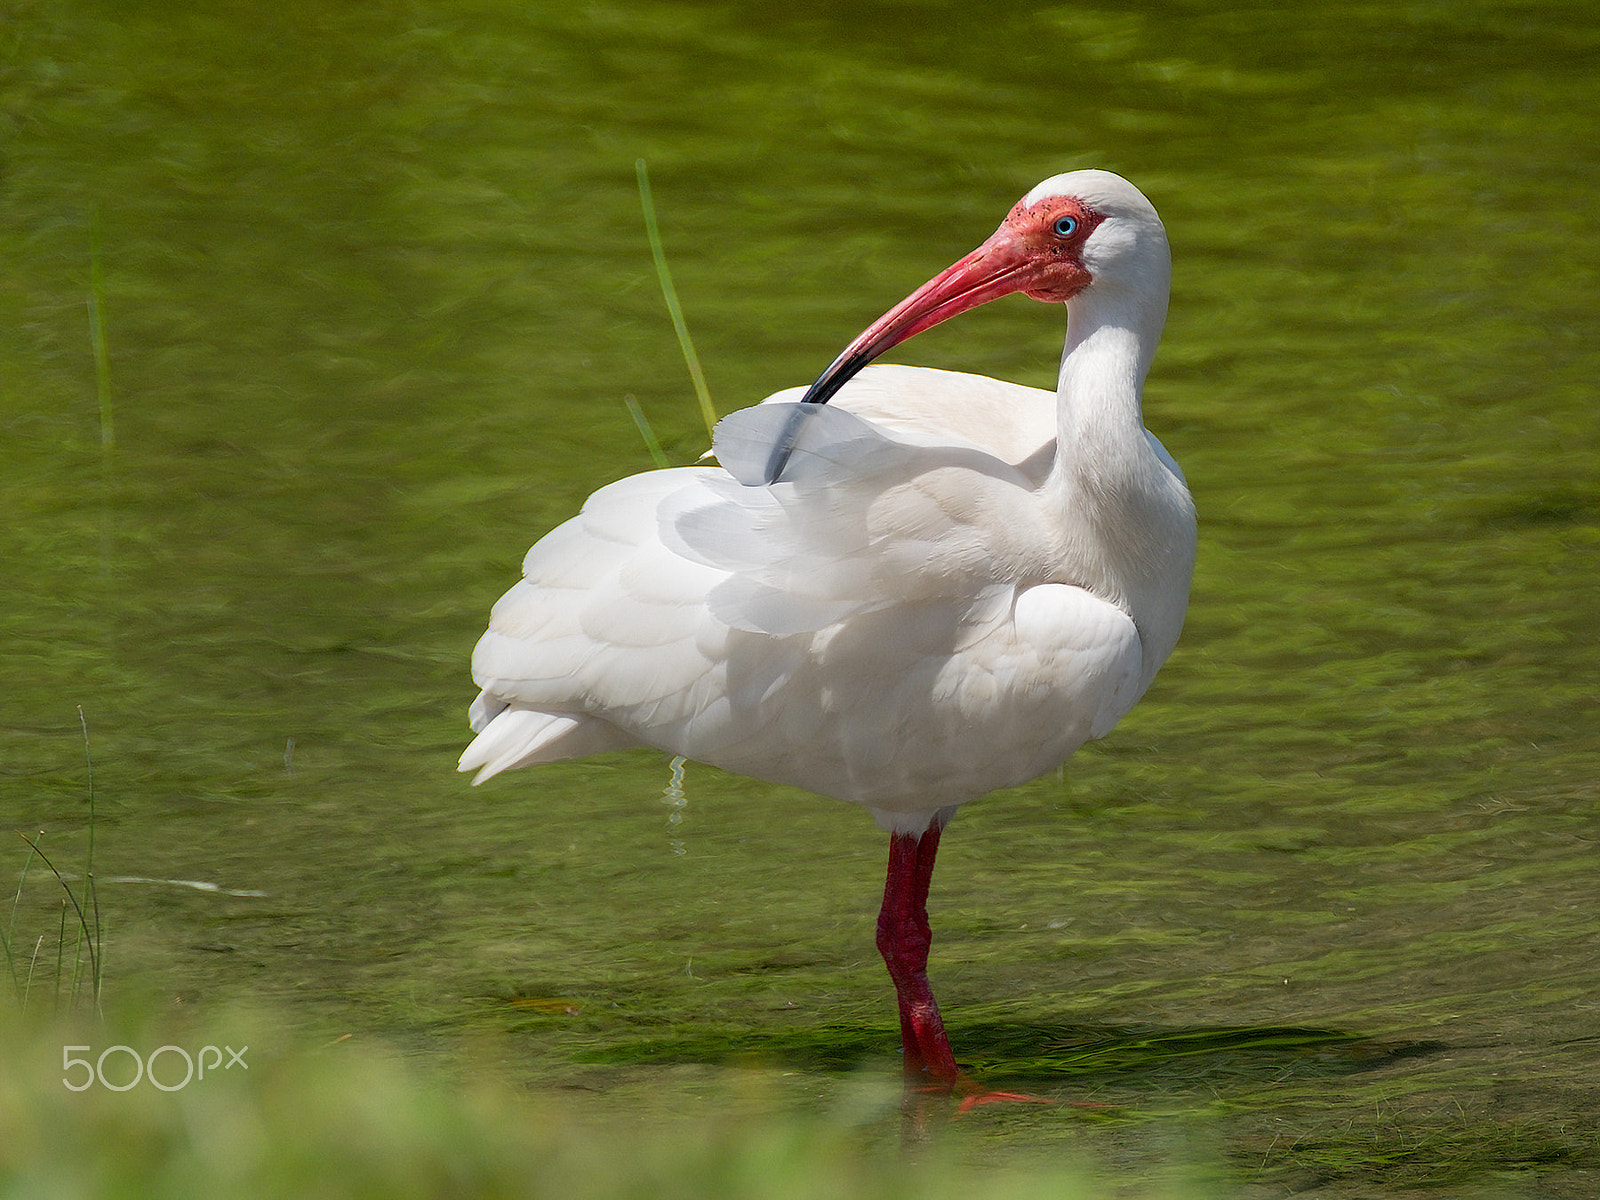 XF100-400mmF4.5-5.6 R LM OIS WR + 1.4x sample photo. White ibis preening plumage in water photography